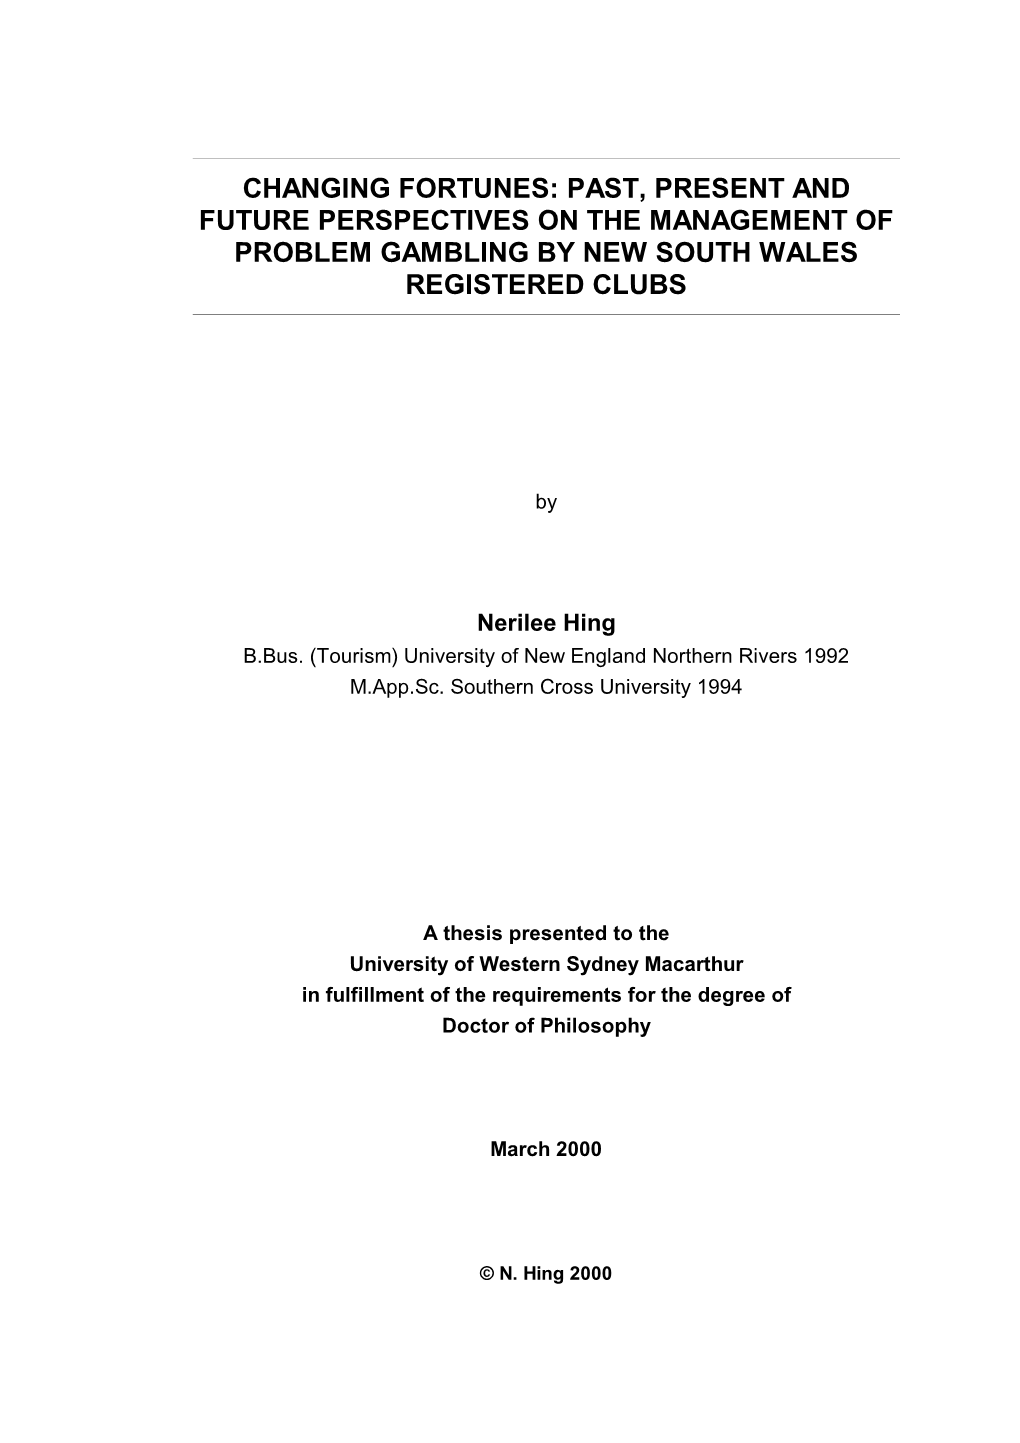 Past, Present and Future Perspectives on the Management of Problem Gambling by New South Wales Registered Clubs